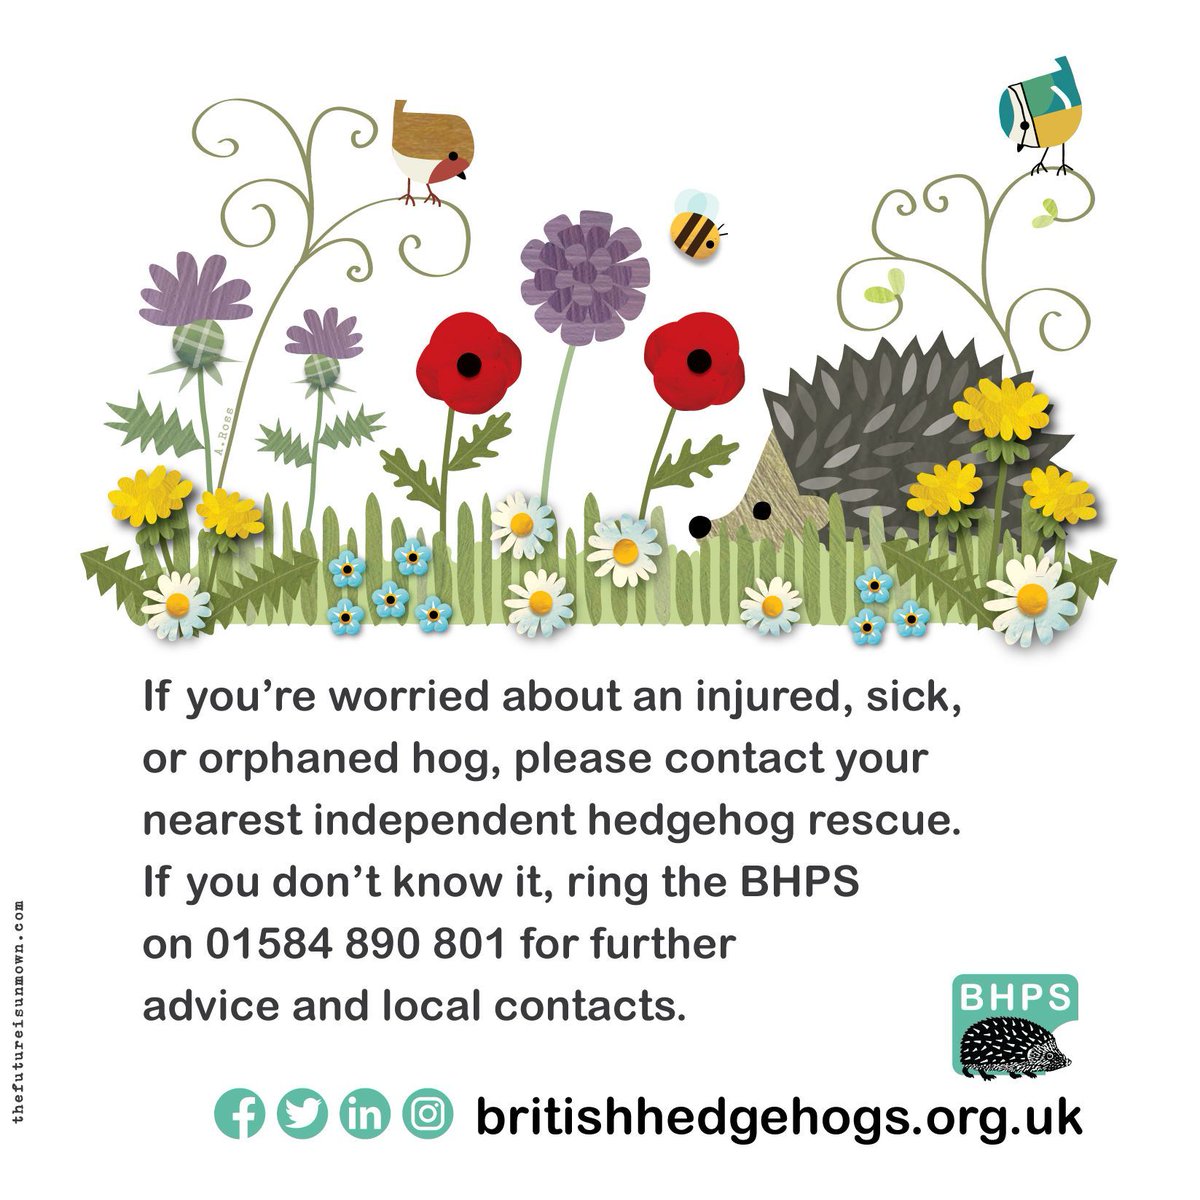 This #ShareSunday, we'd love you to share this infographic designed & donated by the brilliant @TFIUnmown. Help #hedgehogs - #ShareToMakeAware! 🦔